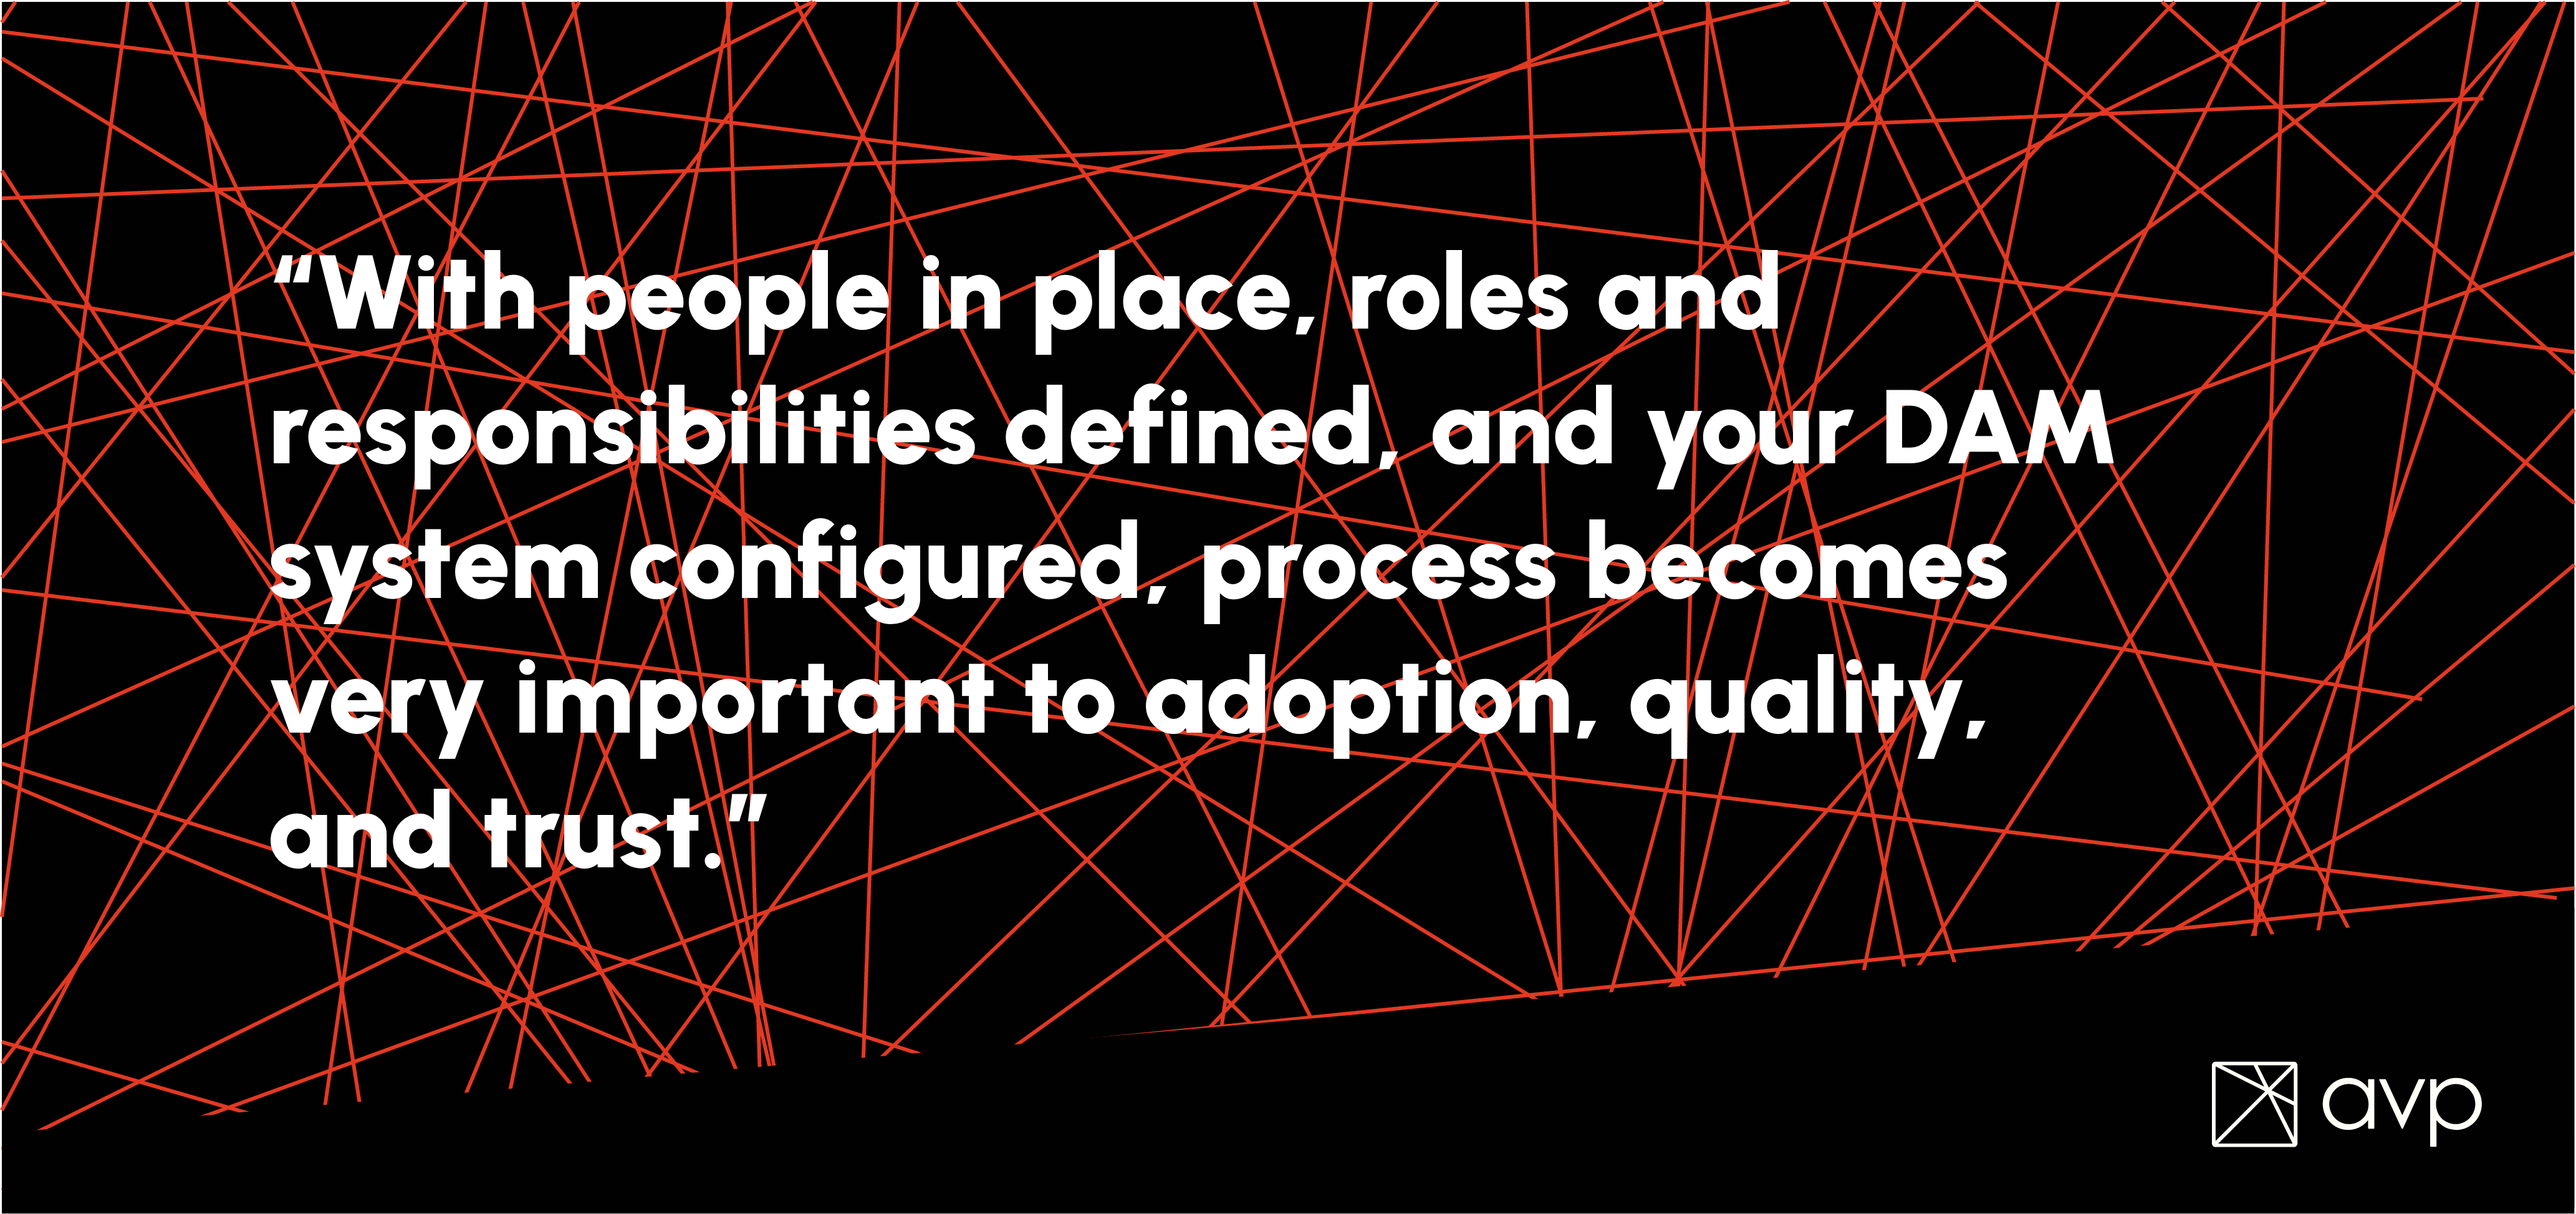 Quote 
"With people in place, roles and responsibilities defined, and your DAM system configured, process becomes very important to adoption, quality, and trust."

-avp logo